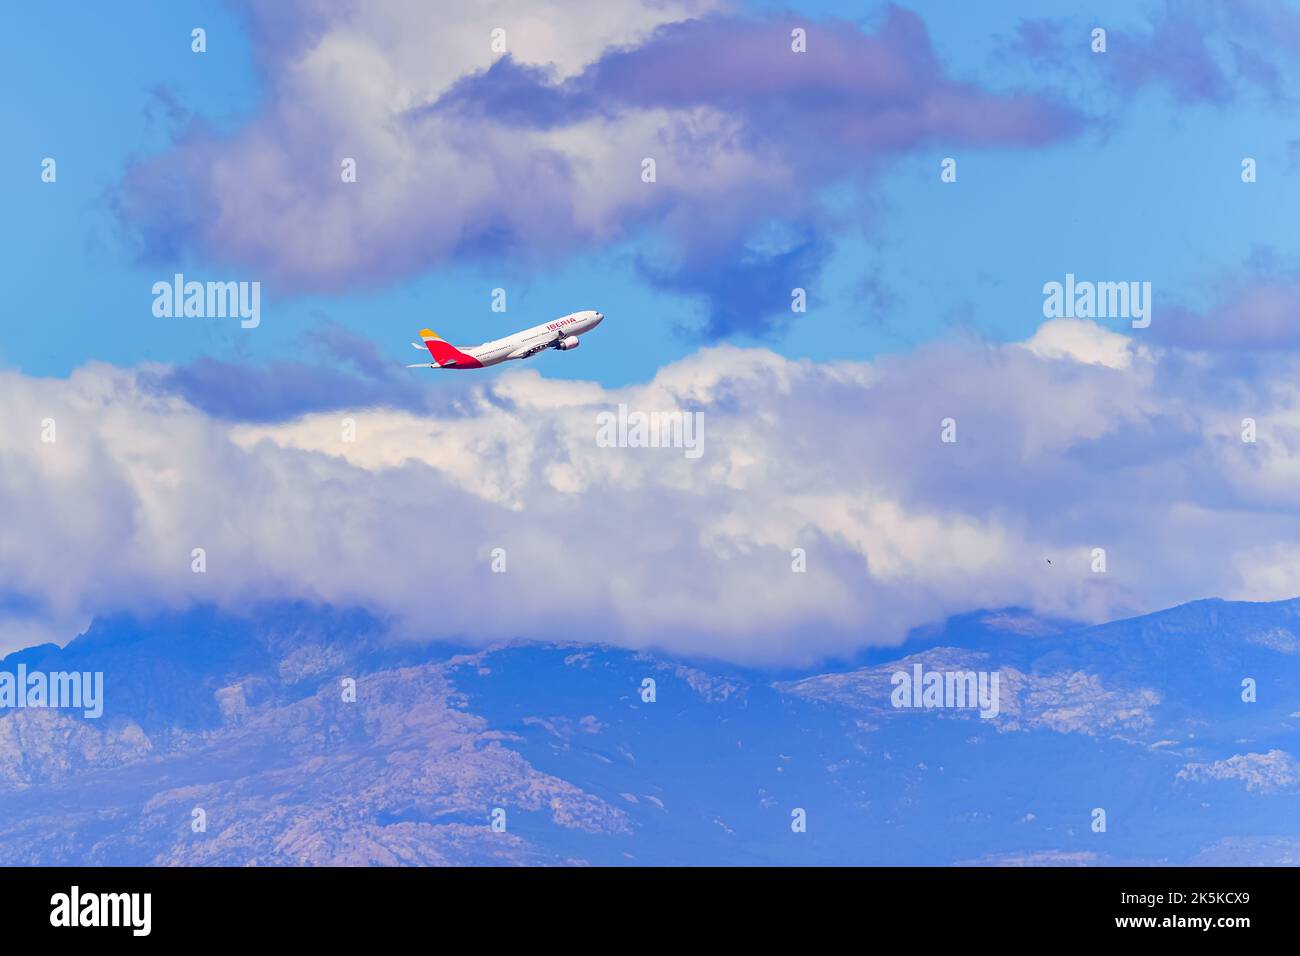 Madrid, Spain, October 30, 2022: Plane of the airline Iberia flying over the mountains of central Spain. Stock Photo